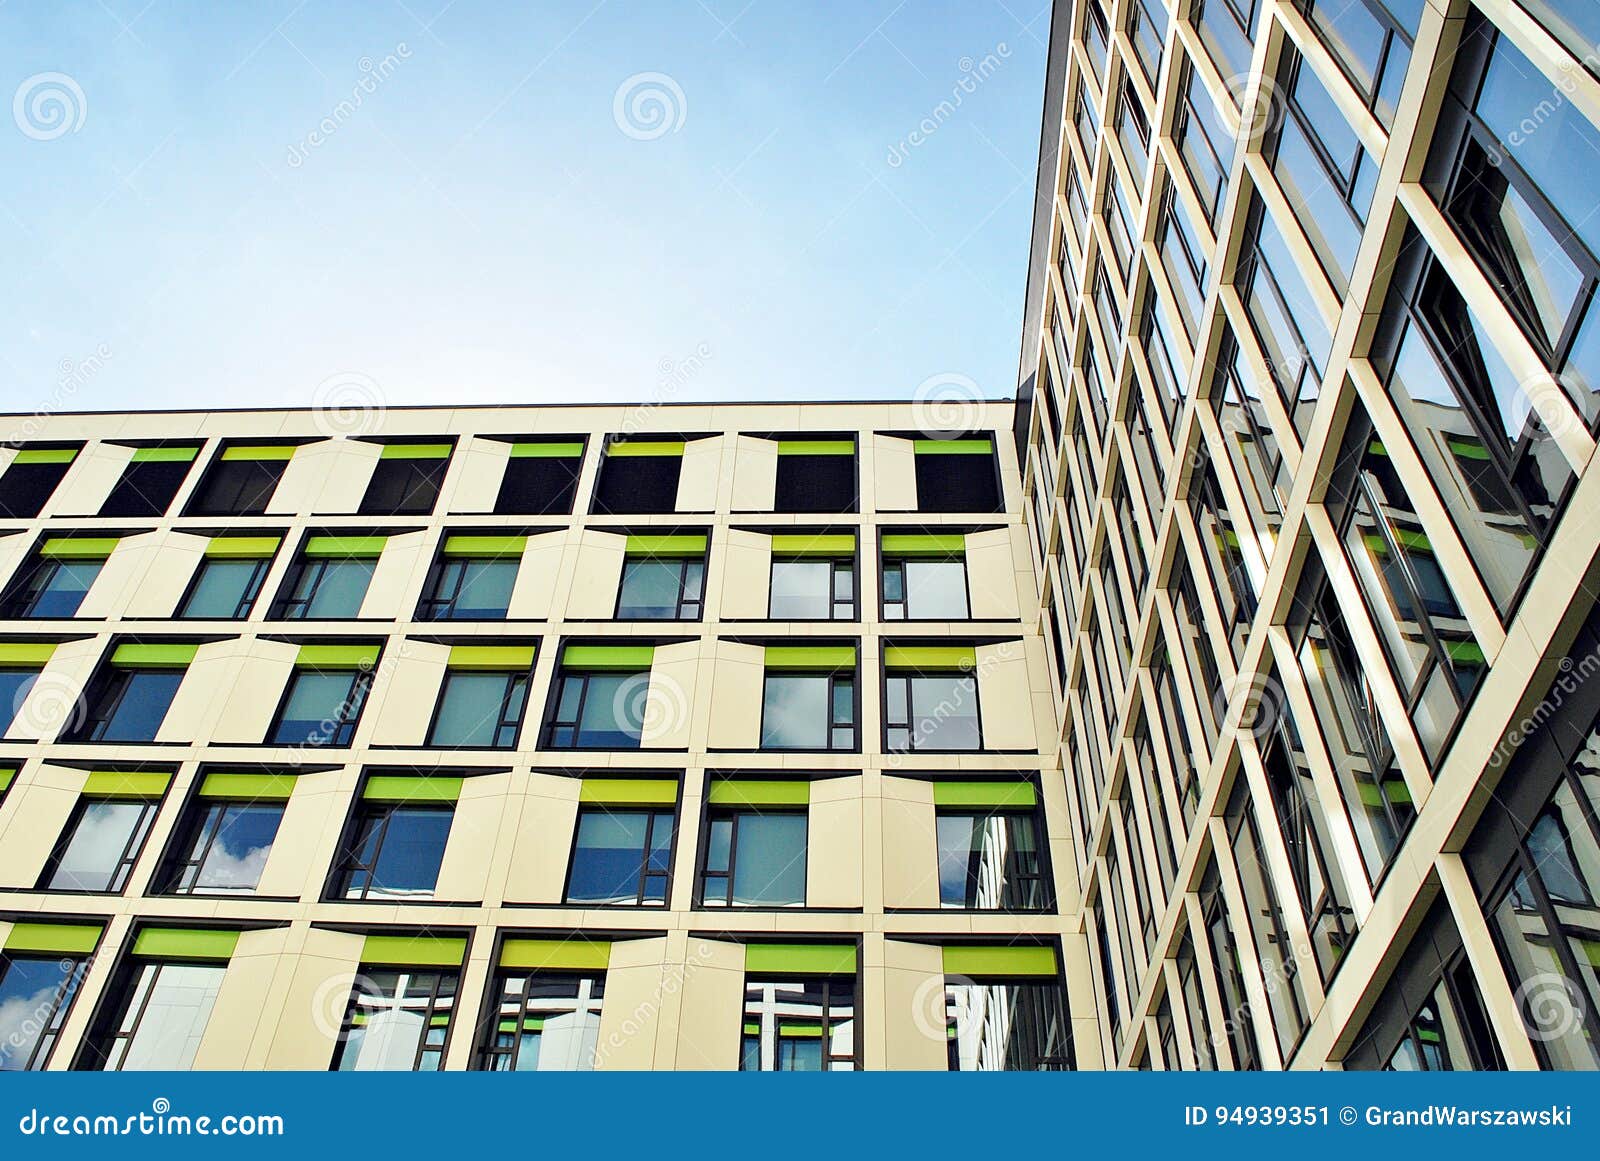 Modern Building.Modern Office Building with Facade of Glass Stock Image ...